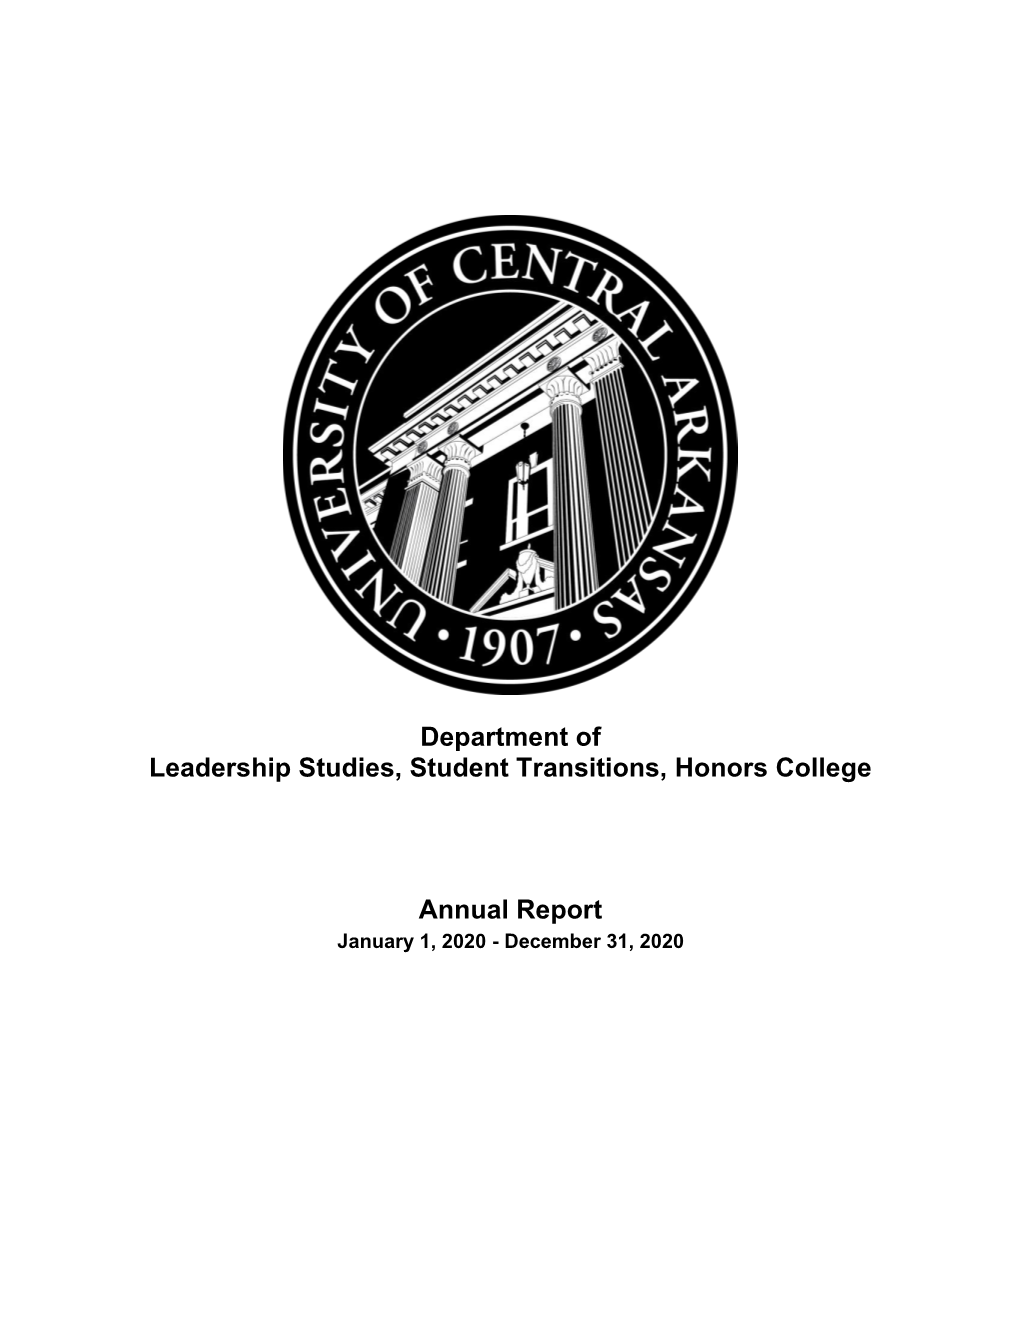 Department of Leadership Studies, Student Transitions, Honors College